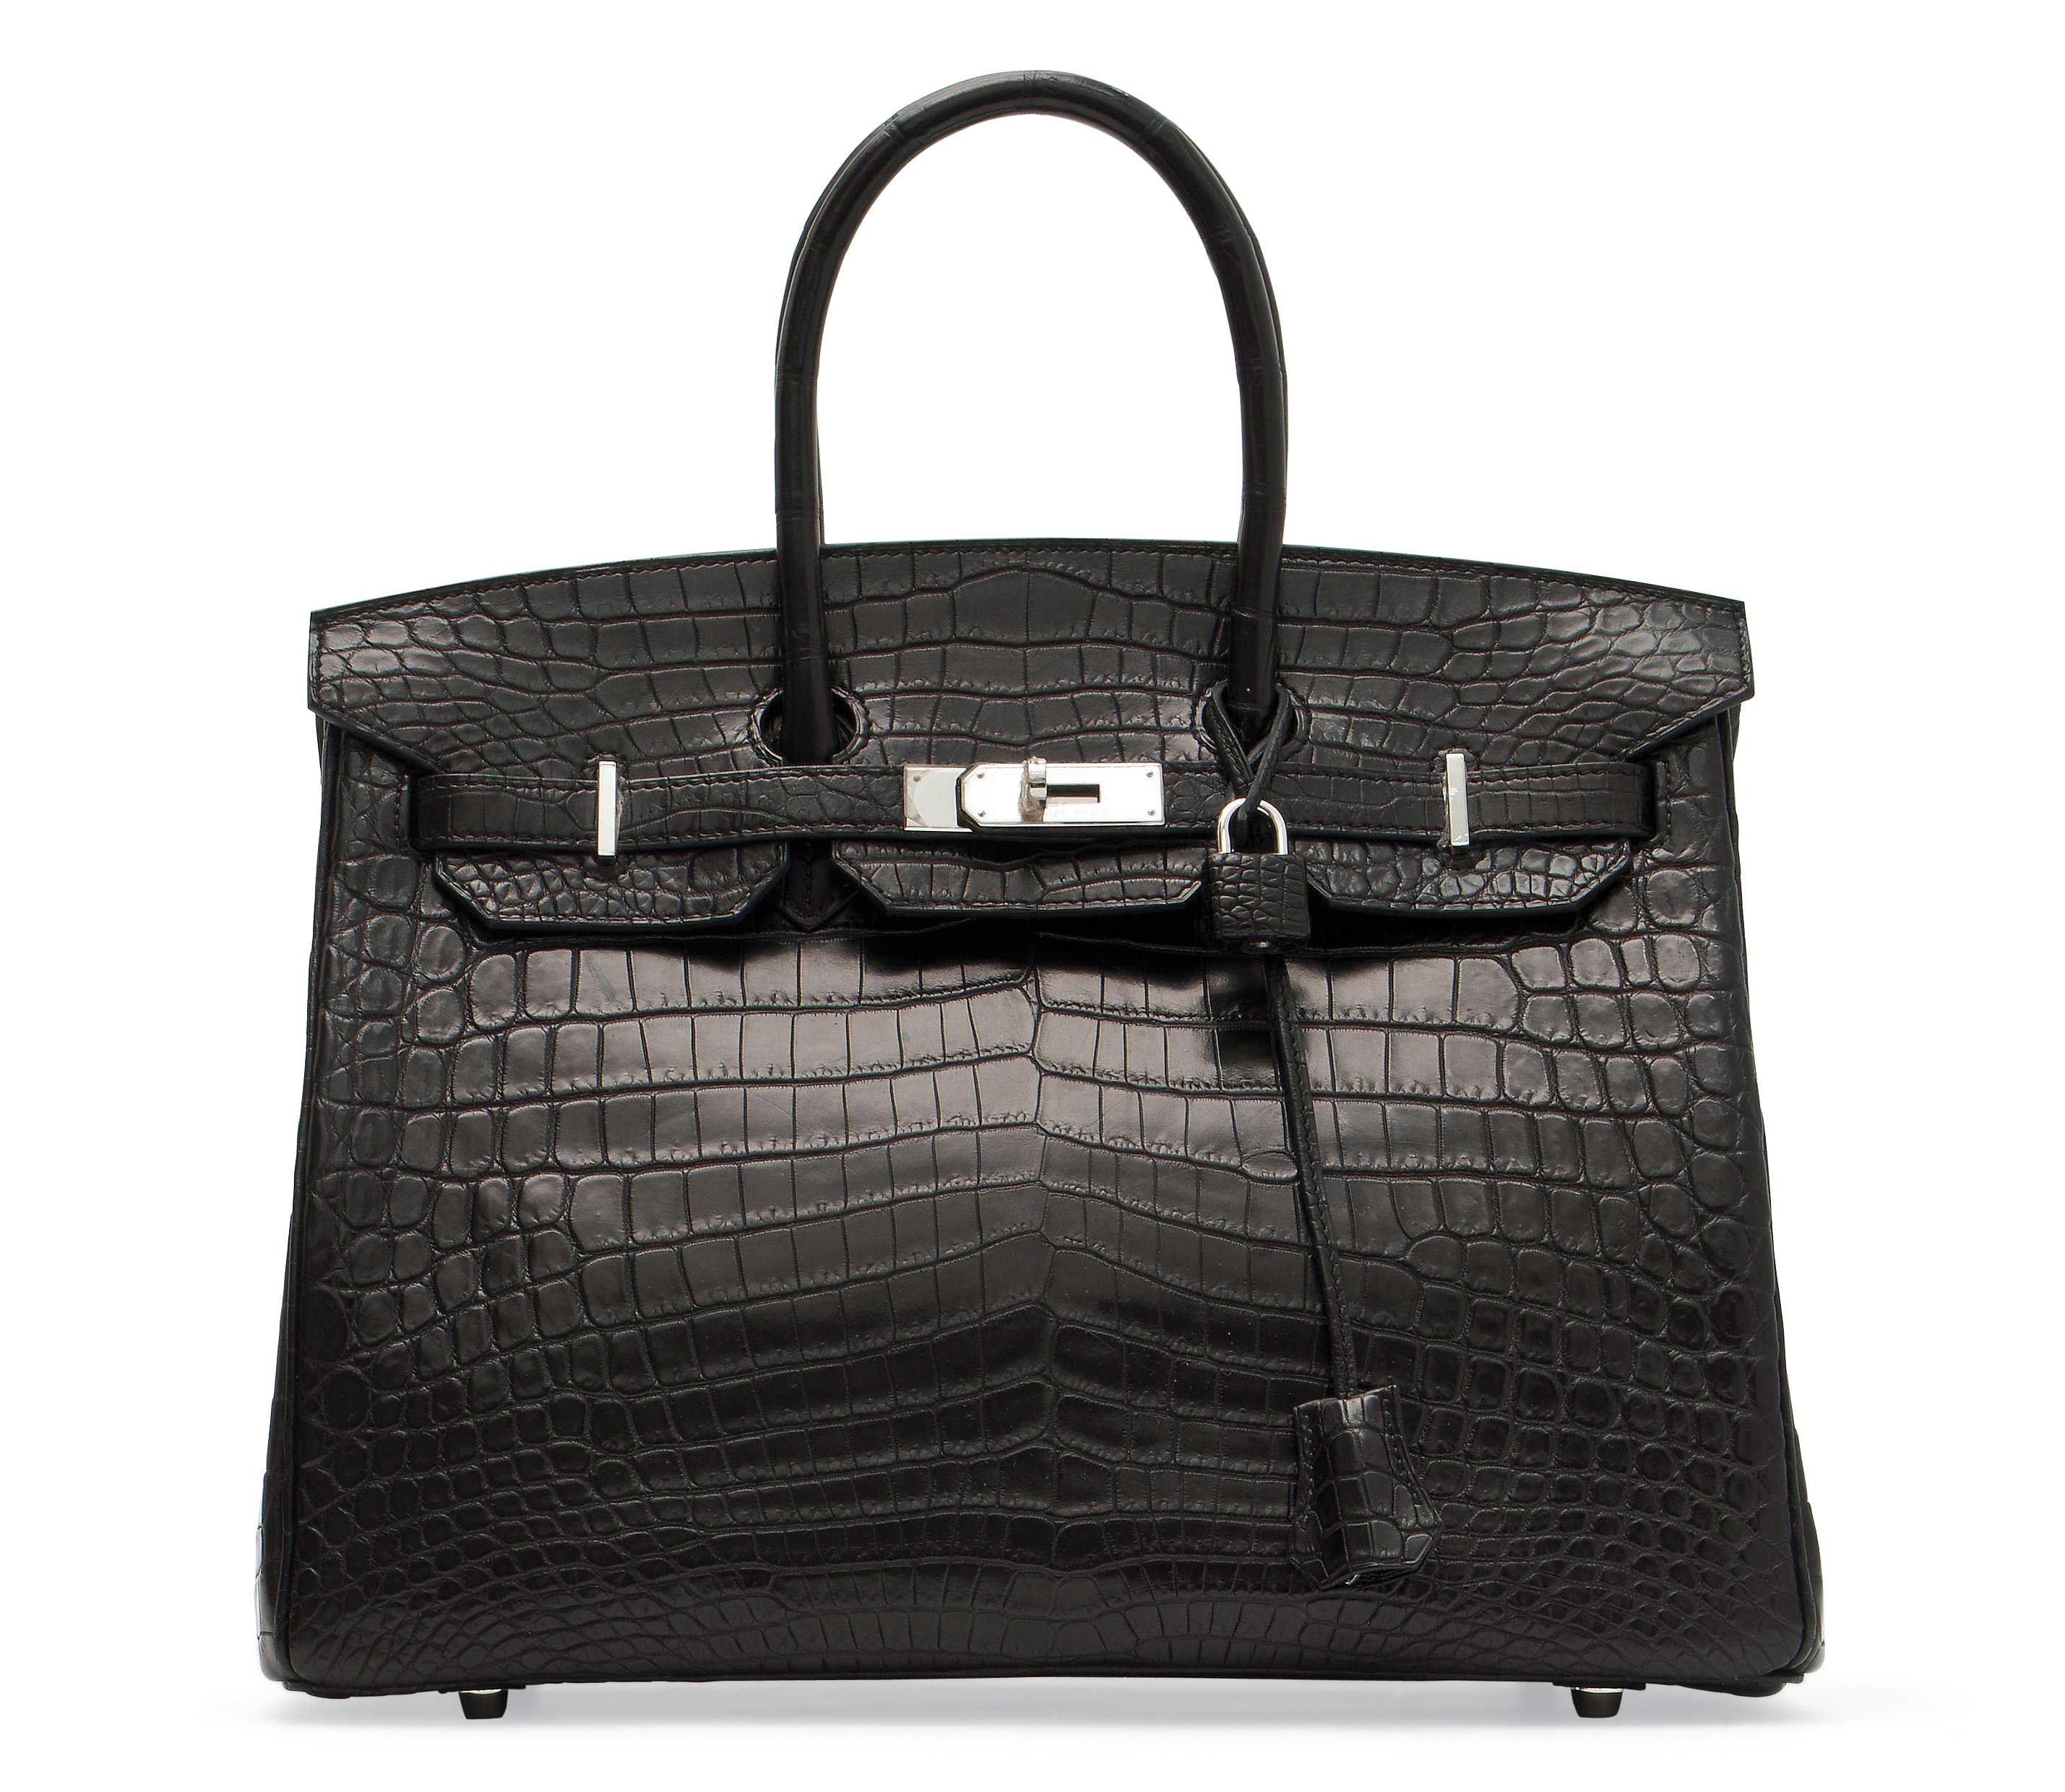 What Is The Most Expensive Hermes Handbag Paul Smith